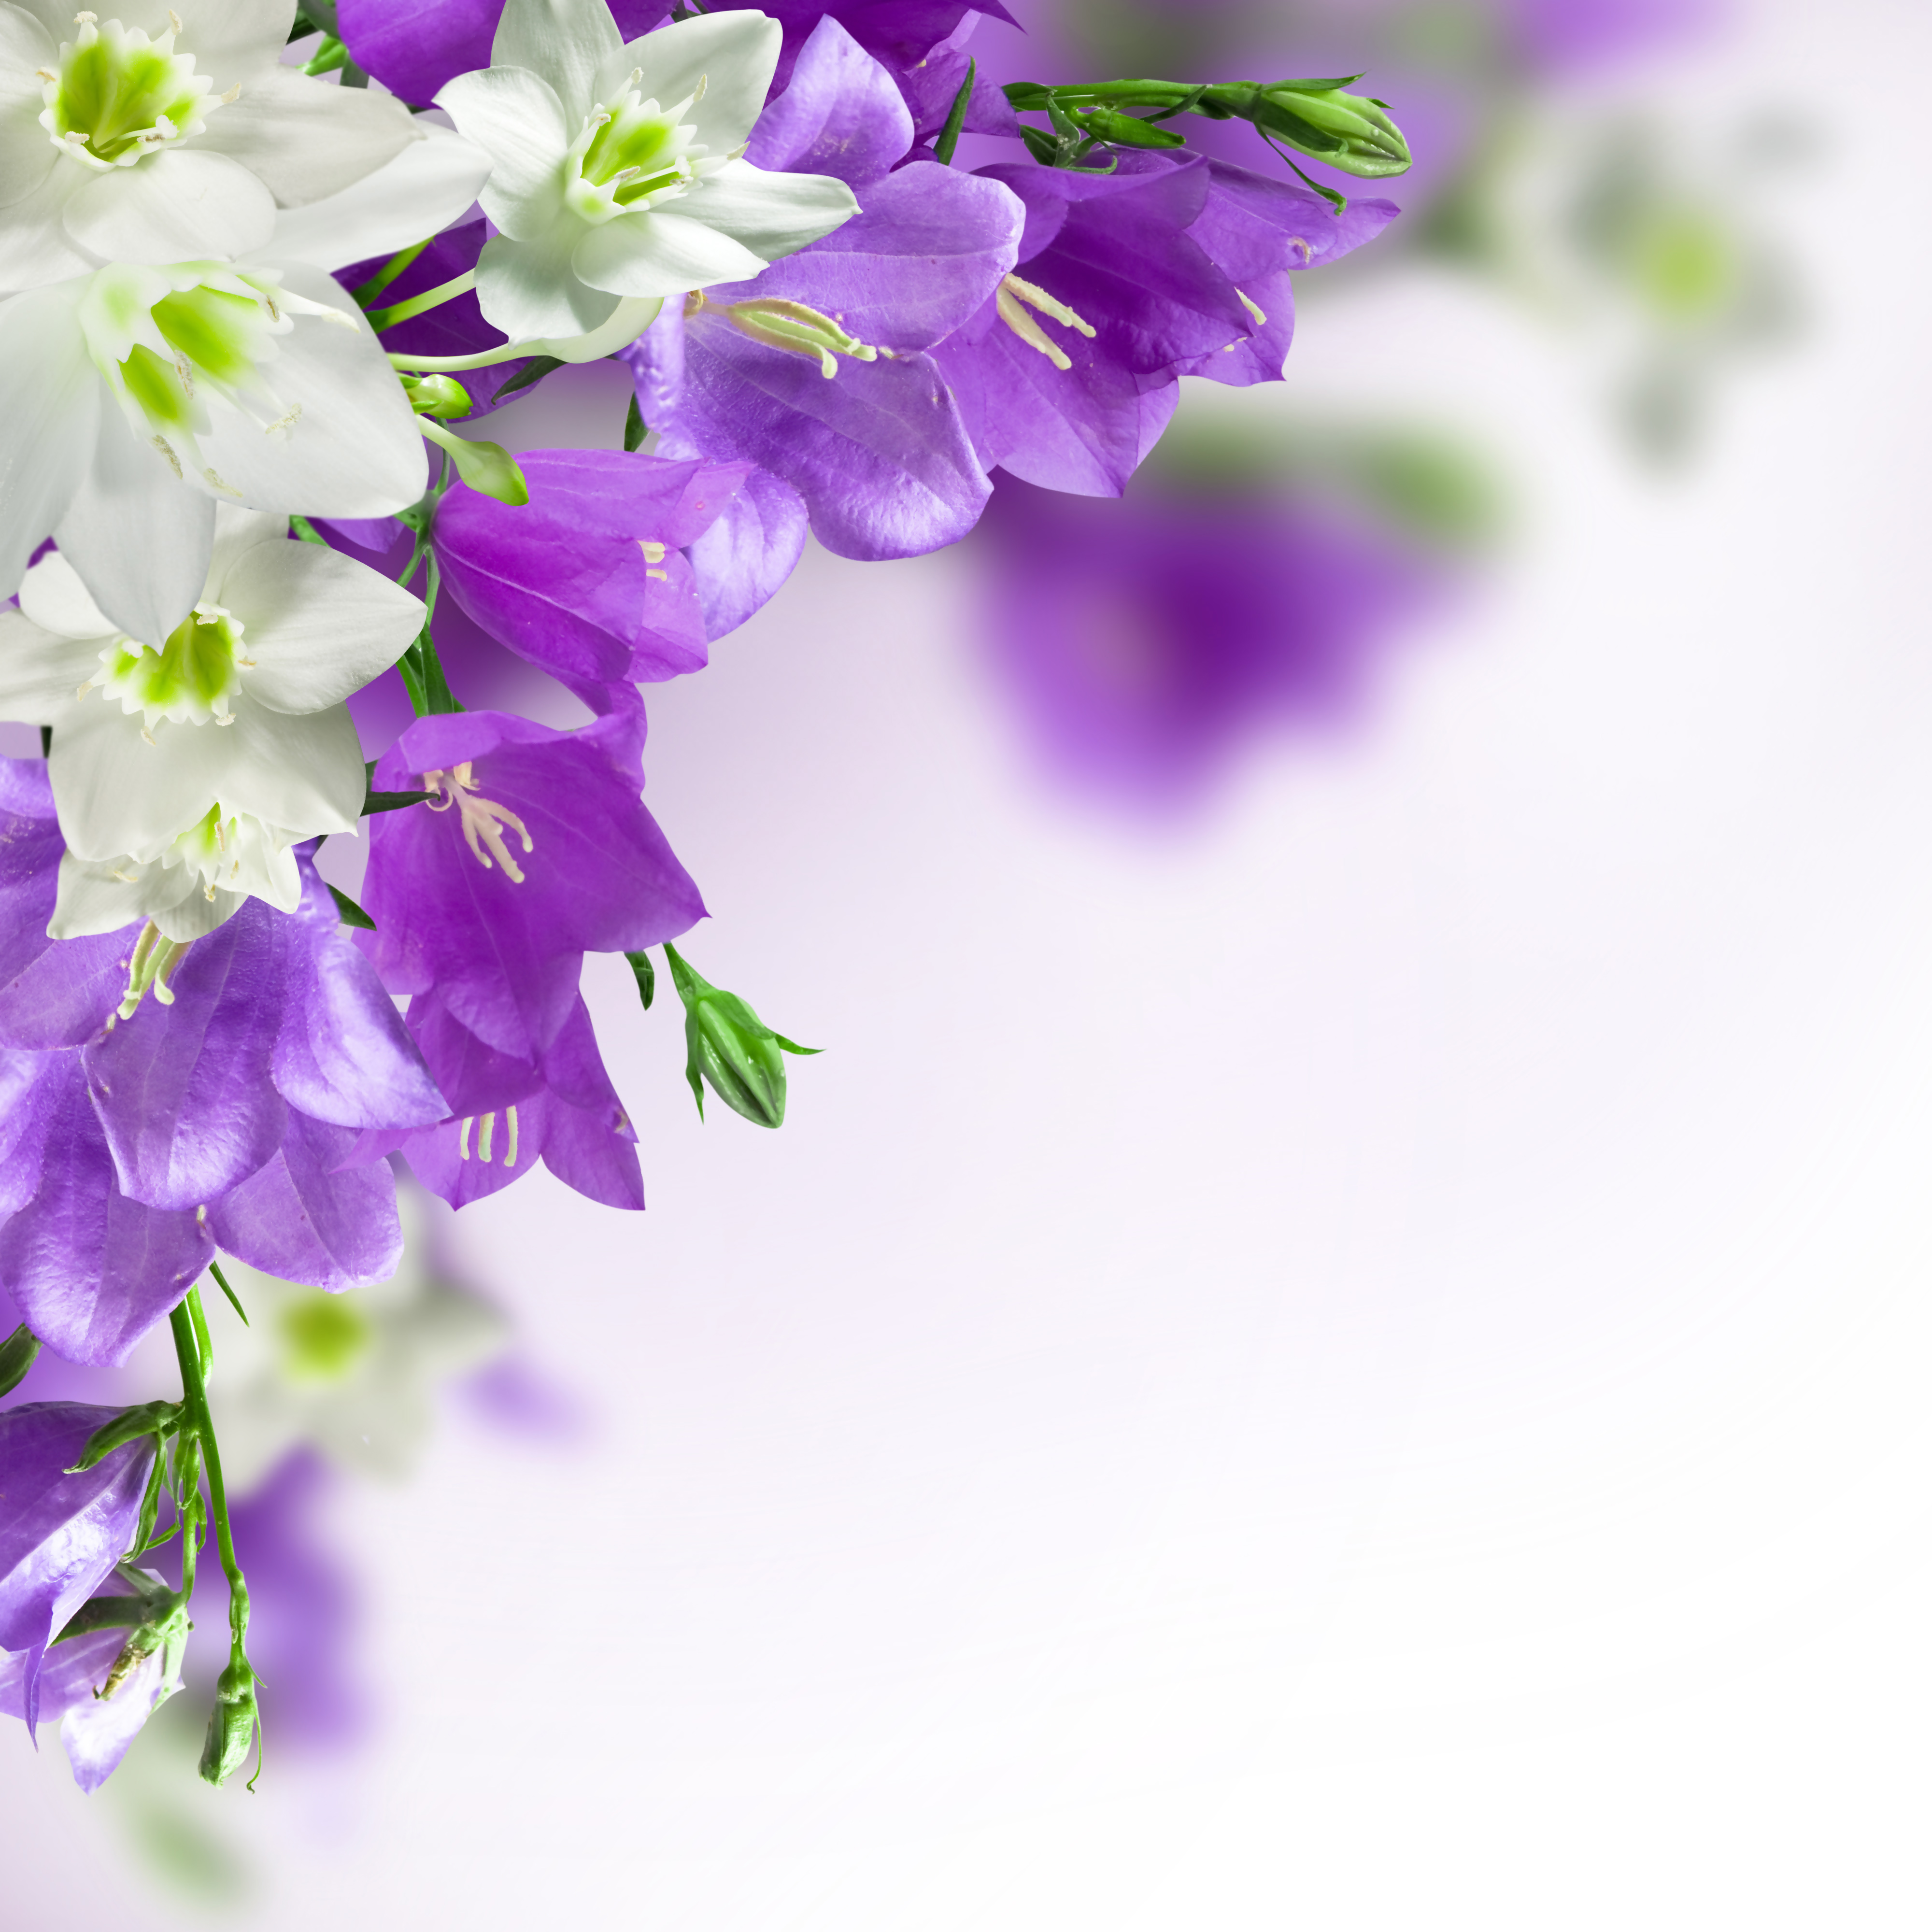 Spring Background with White and Purple Flowers | Gallery ...